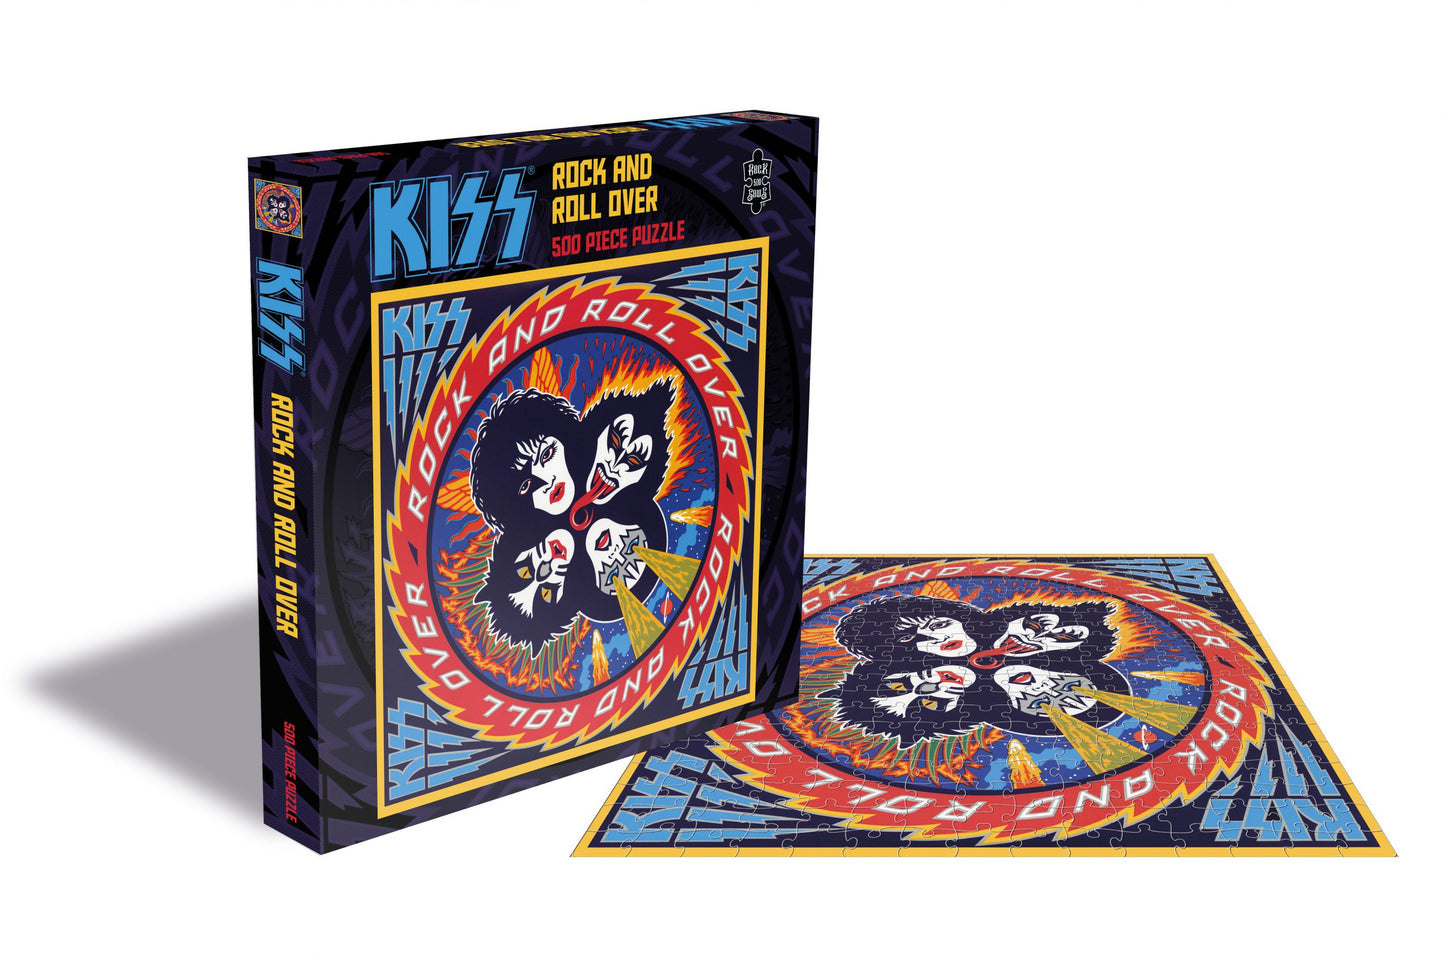 Kiss - Rock and Roll Over, 500 Piece Puzzle